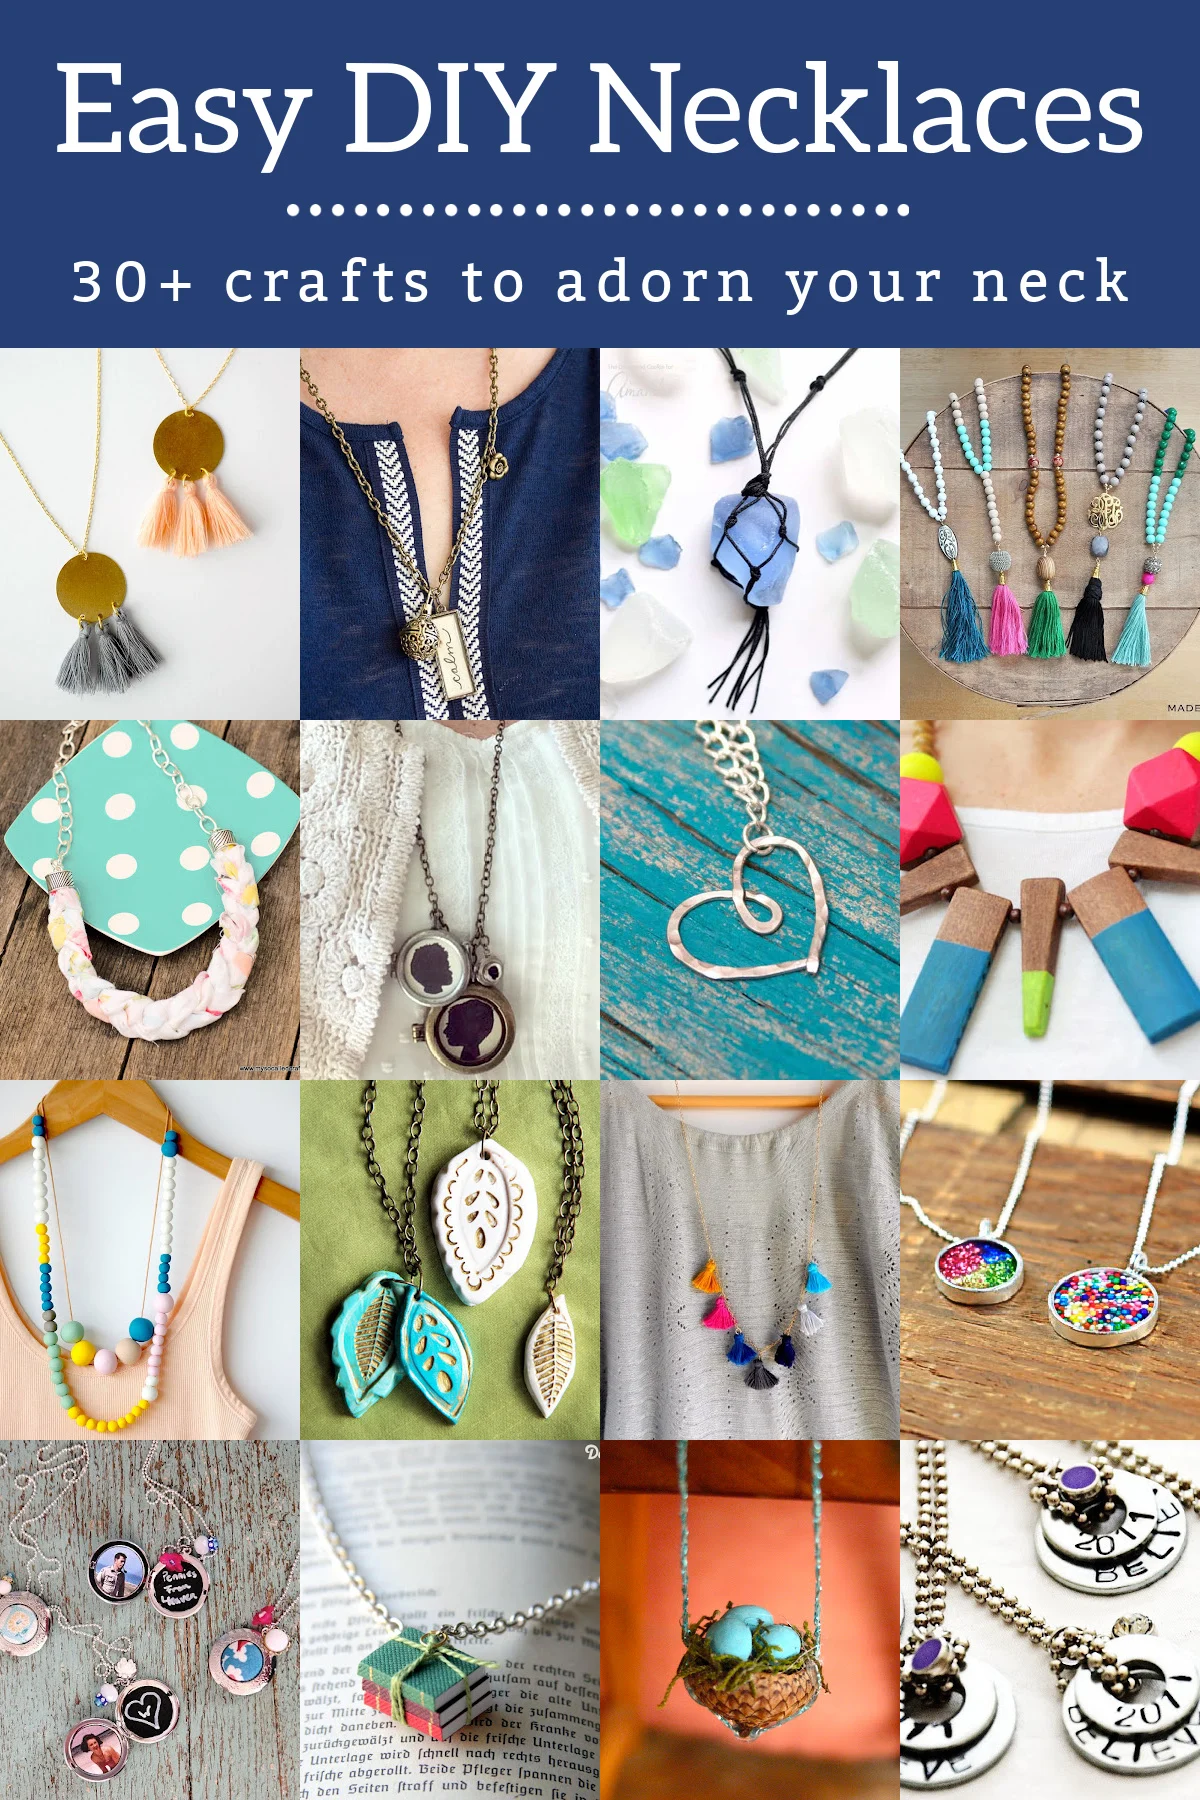 DIY Necklaces: 30+ Ideas for Gifts or Selling - Mod Podge Rocks